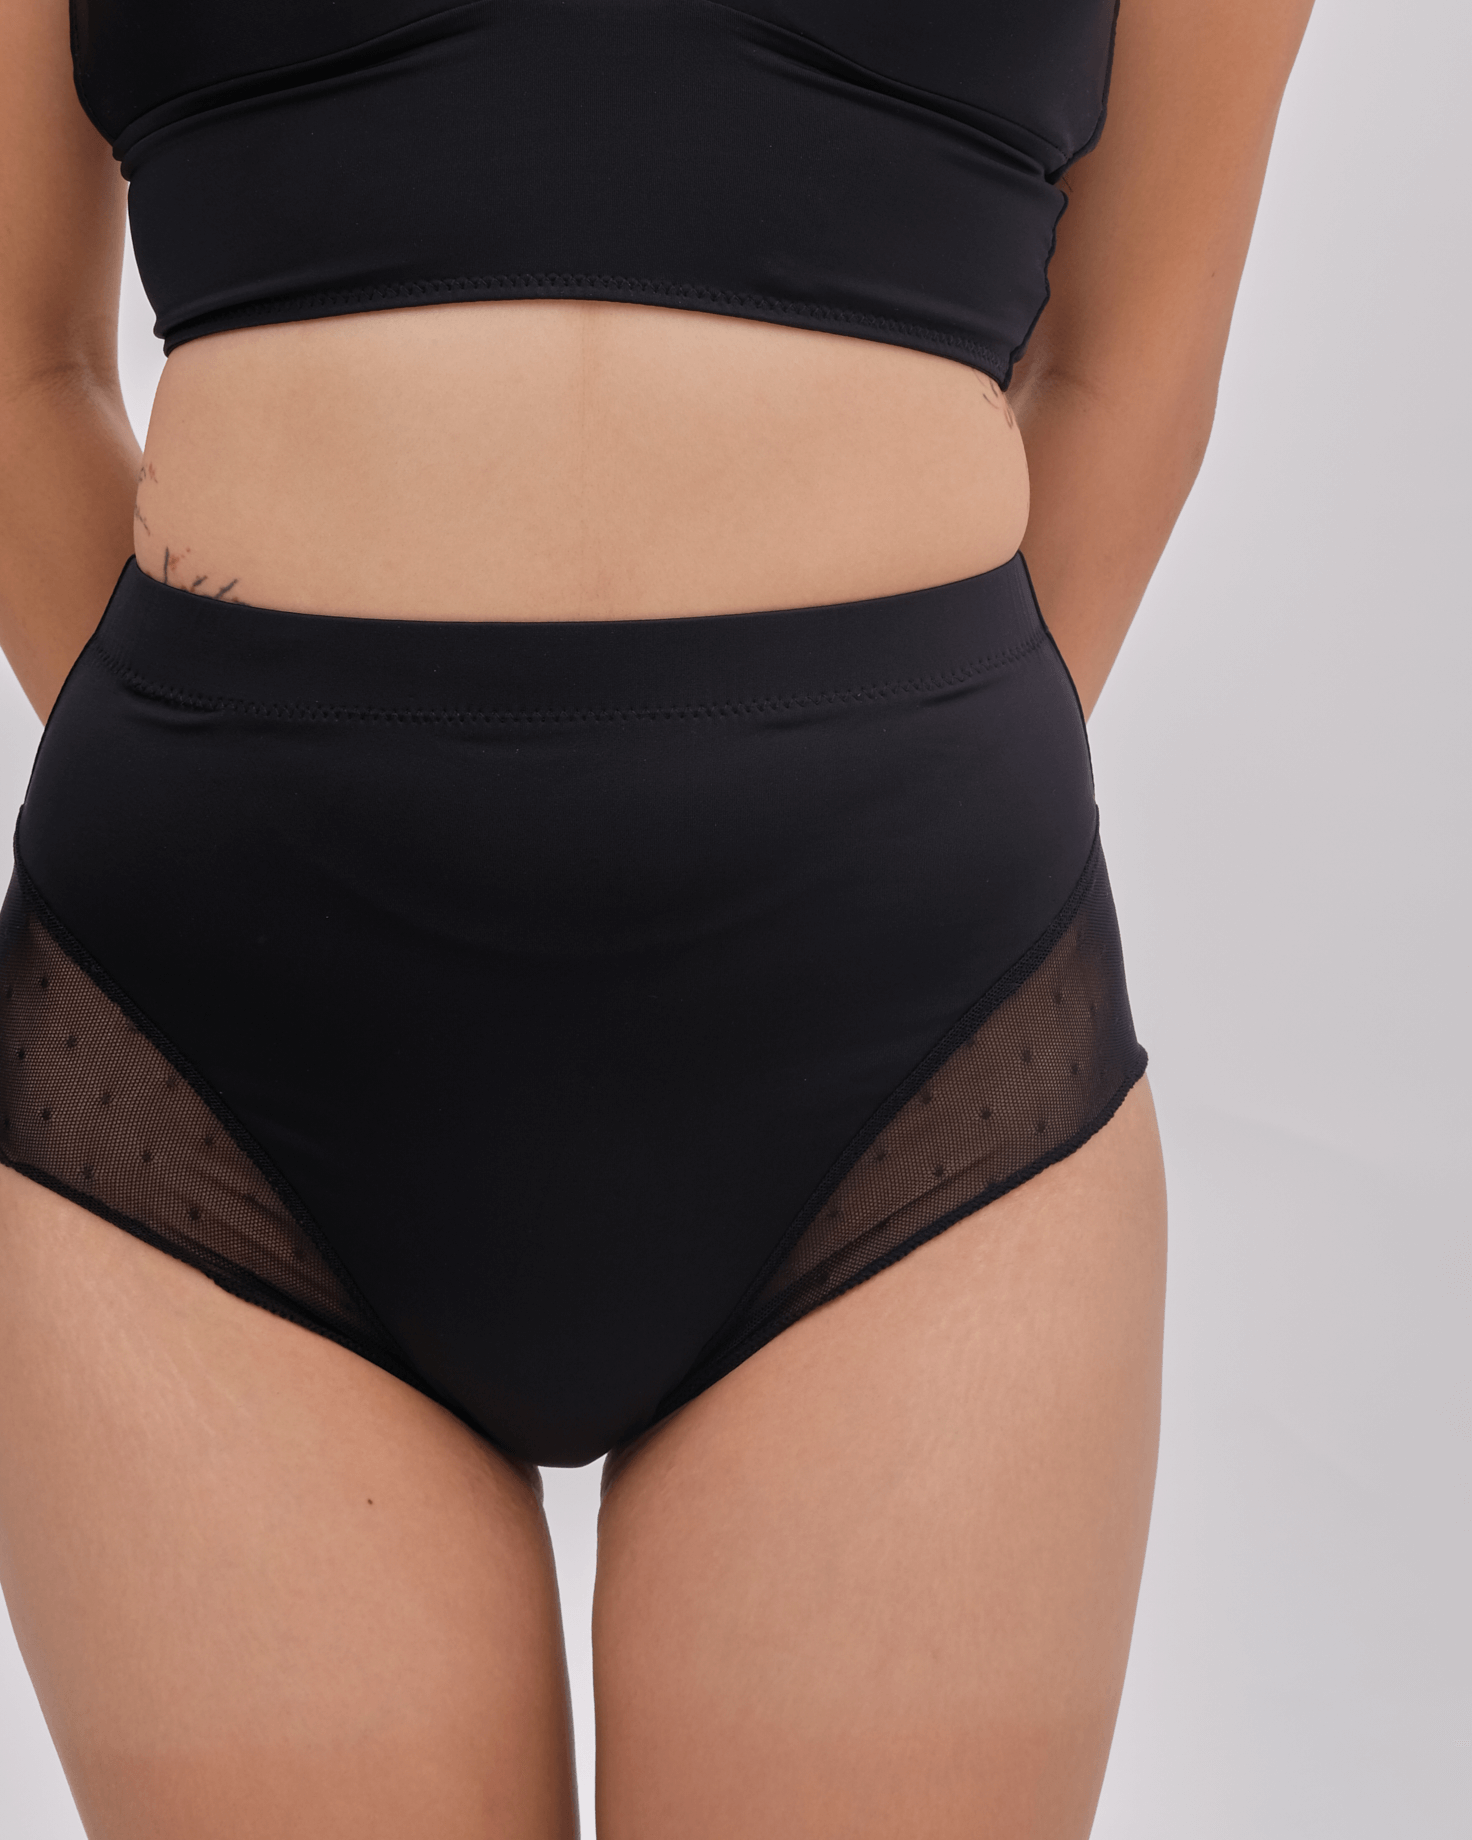 confetti high waist panelled lace panty – Our Bralette Club